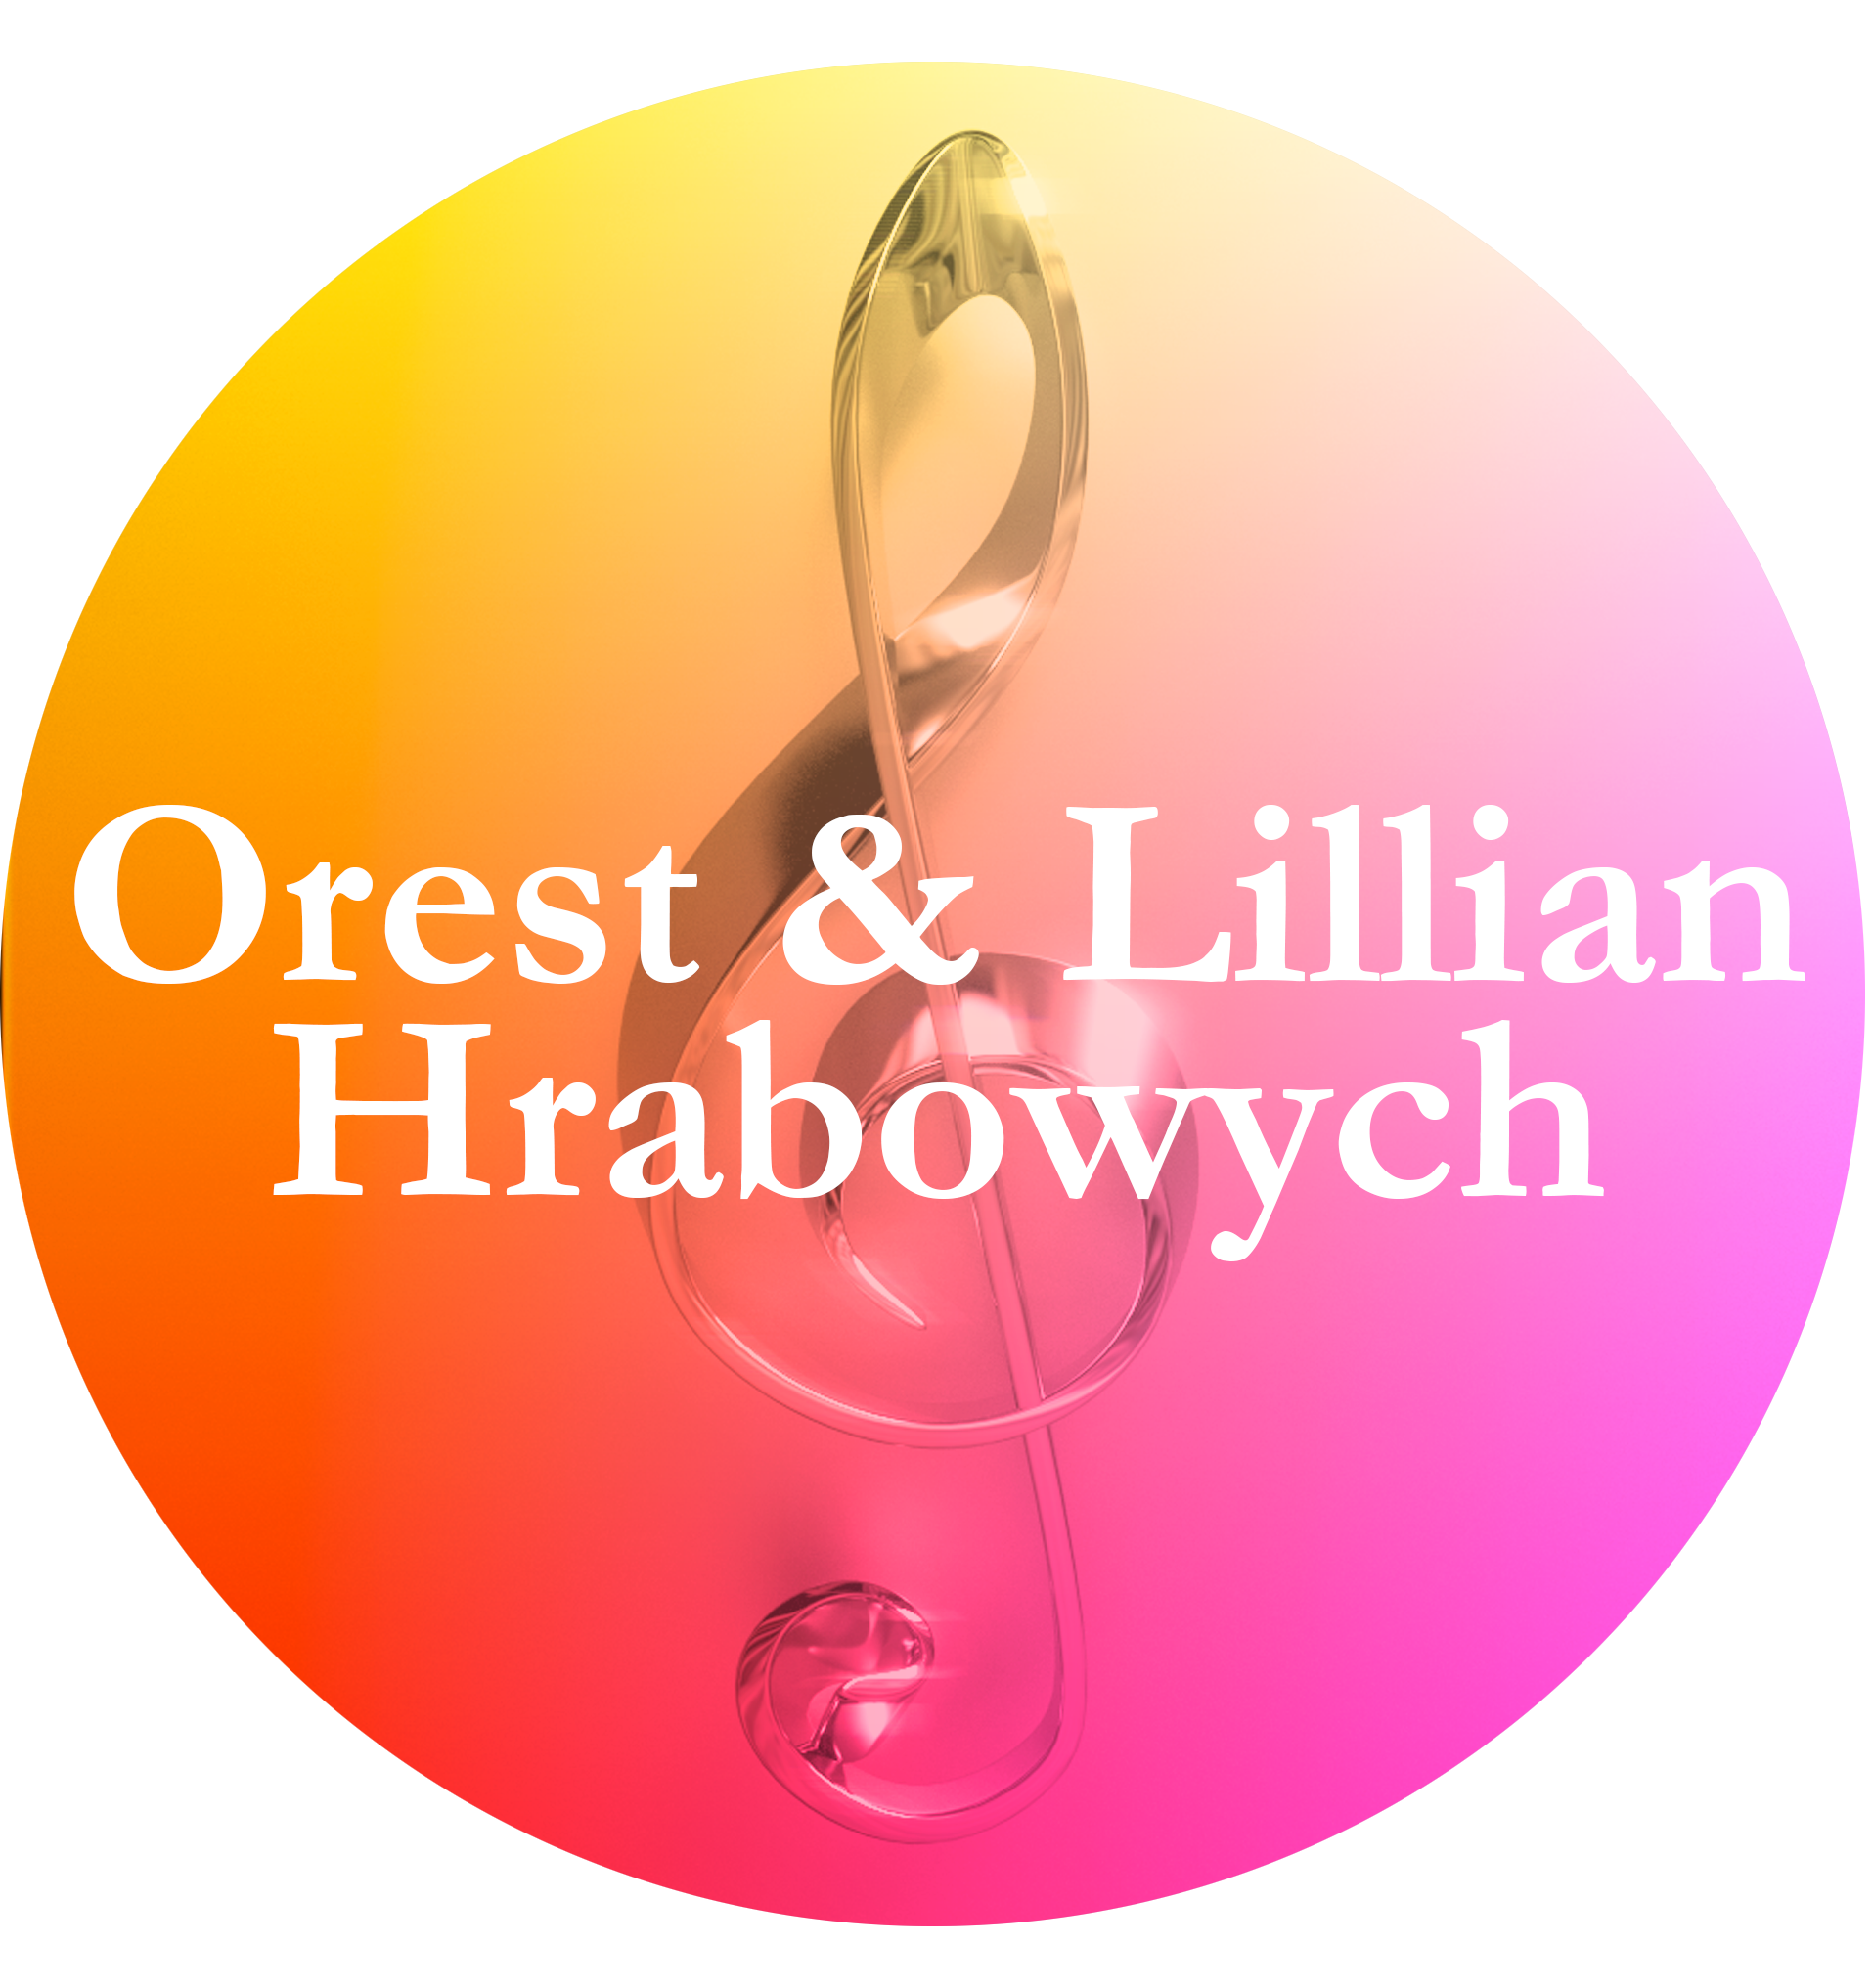 Orest-&-Lillian-Hrabowych.png